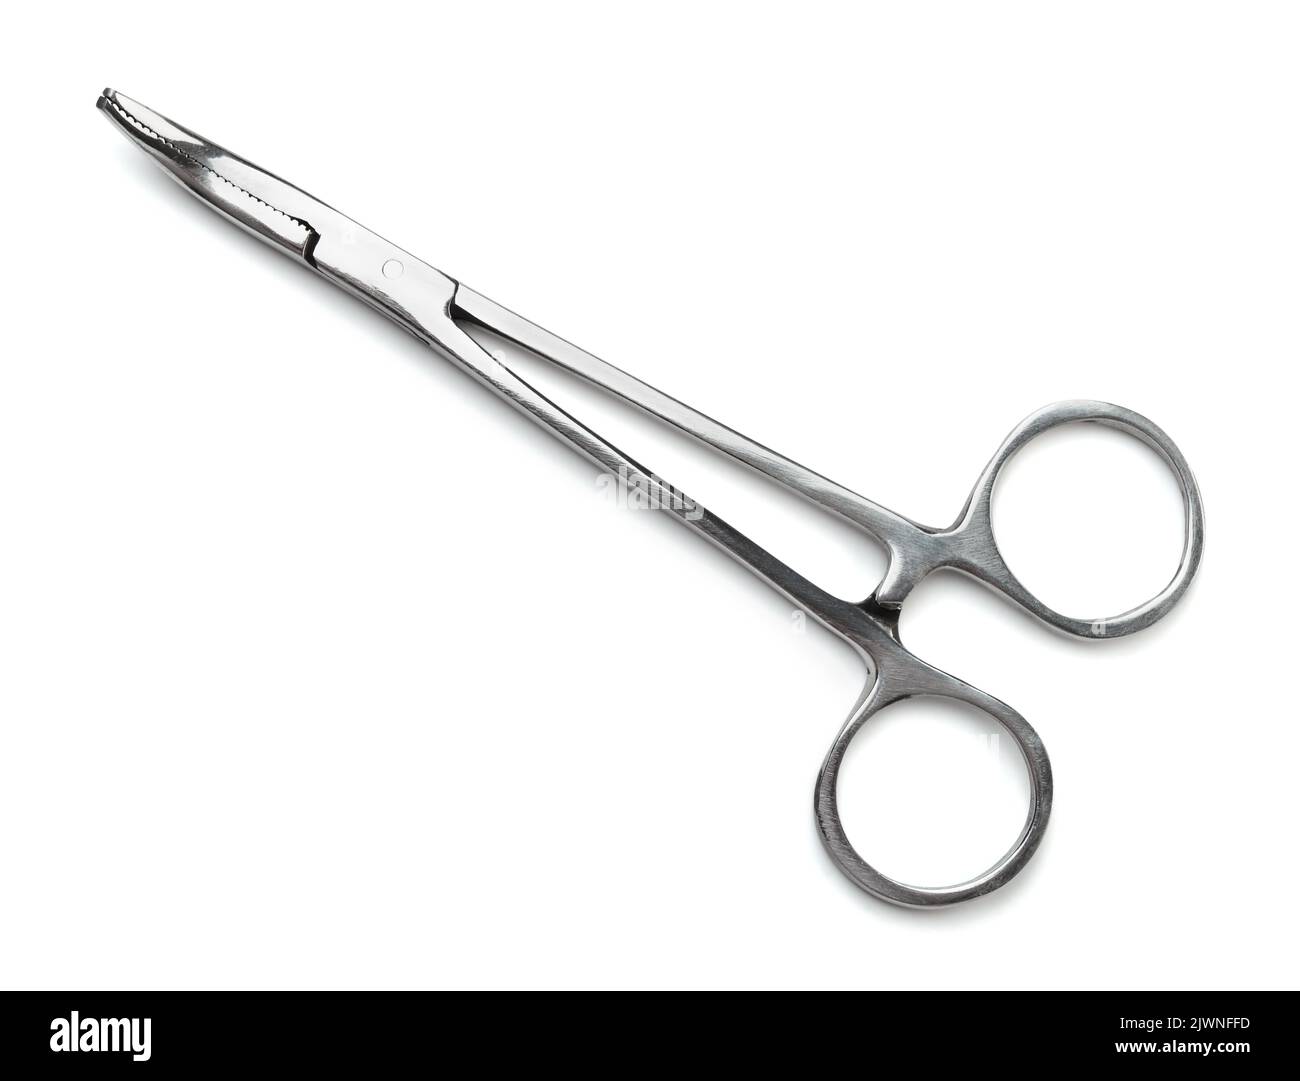 Top view of steel surgical curved forceps isolated on white Stock Photo